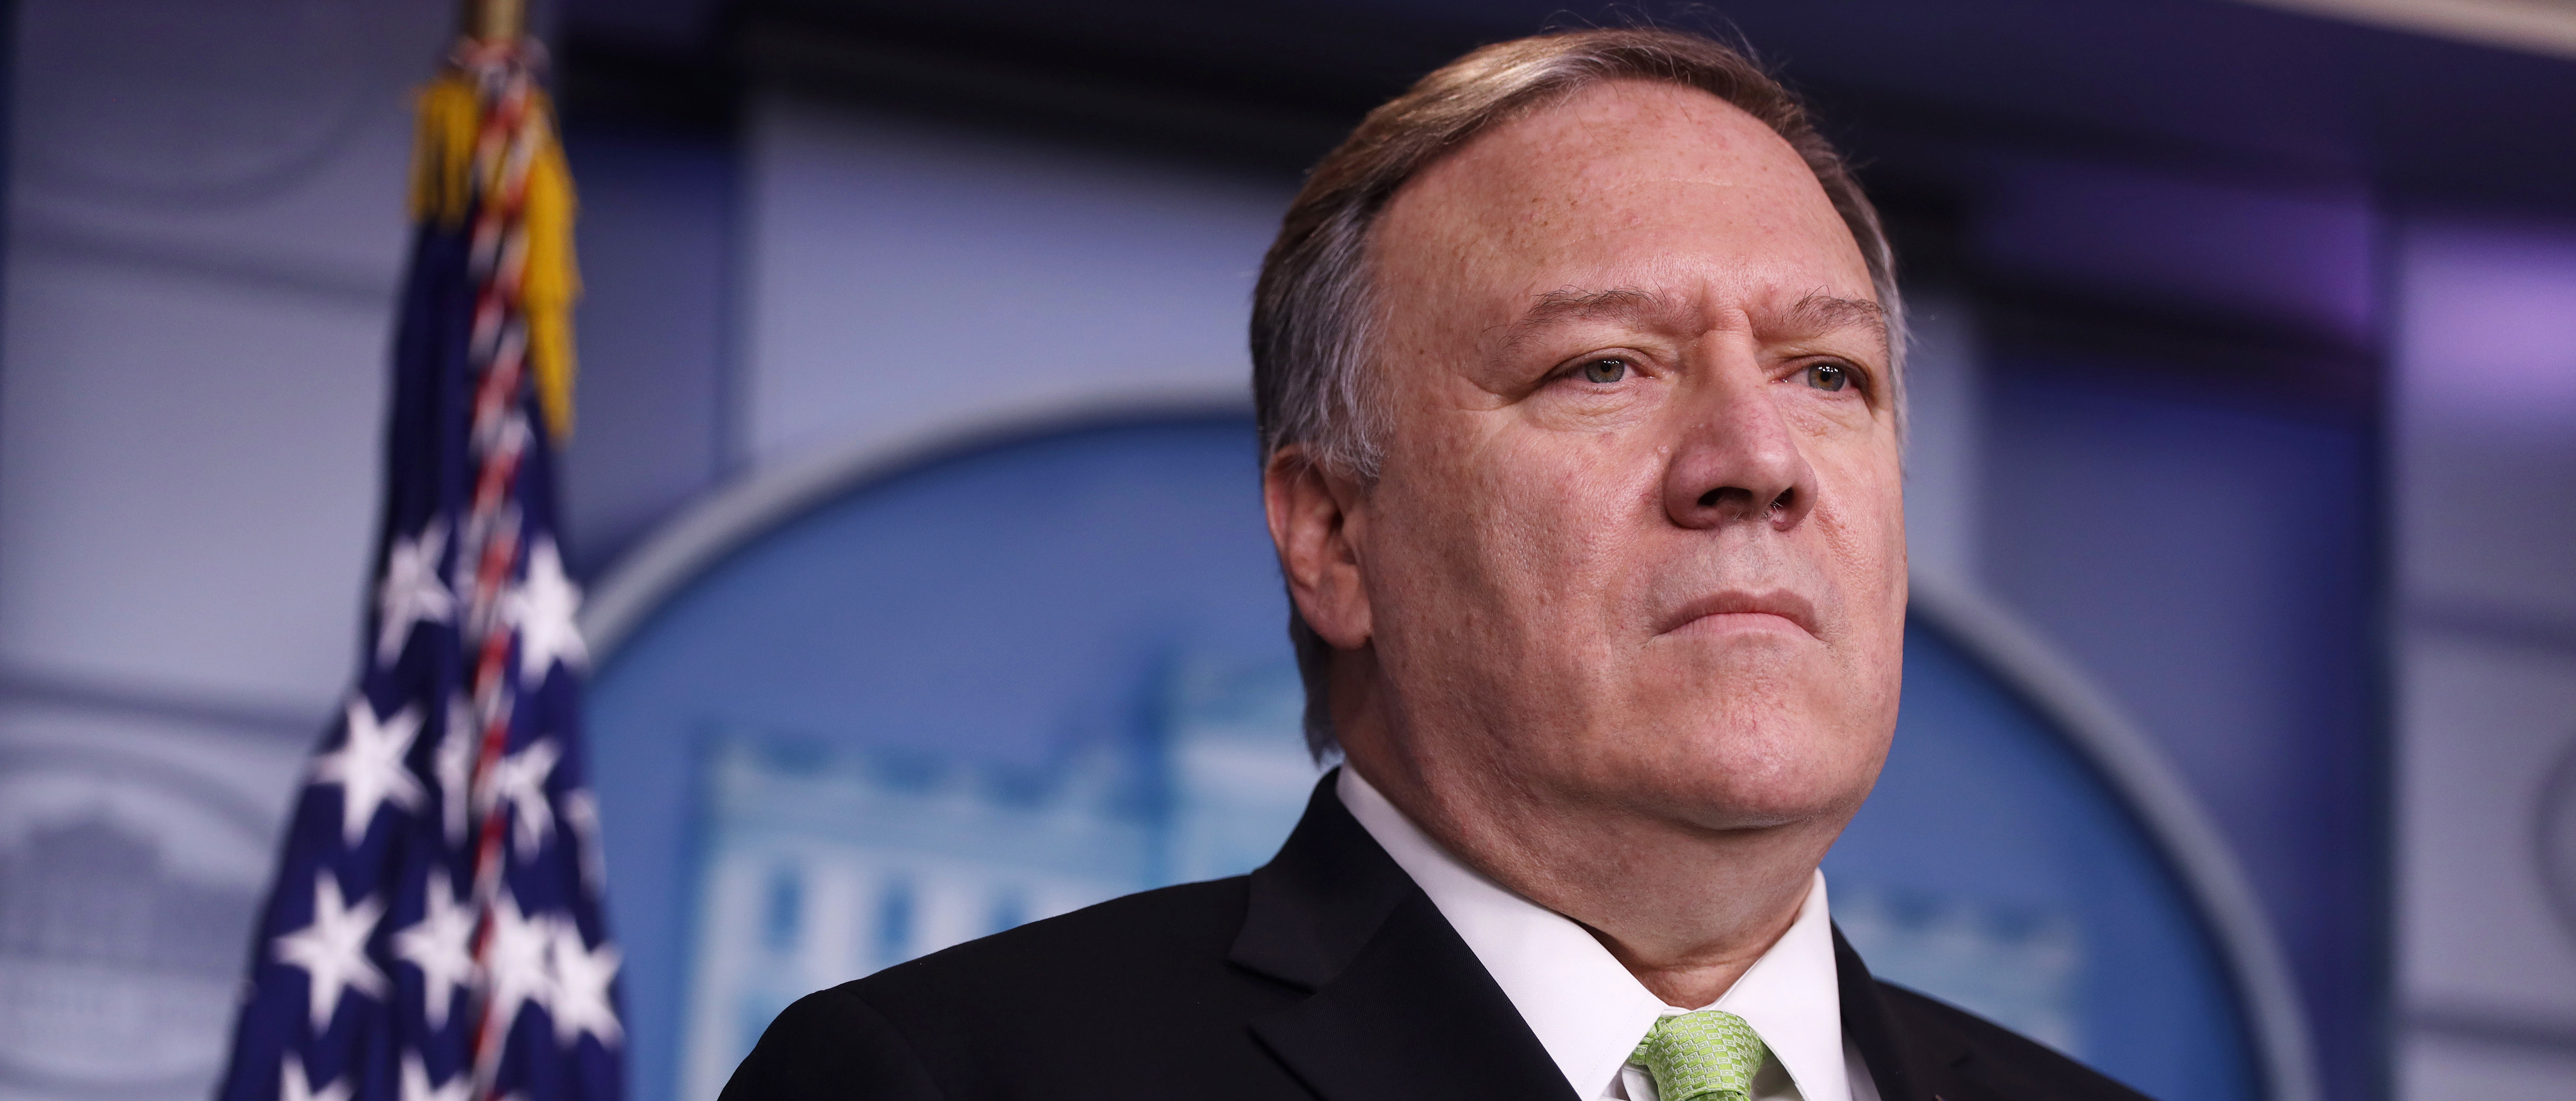 U.S. Secretary of State Mike Pompeo participates in a press briefing in the James S. Brady Press Briefing Room of the White House January 10, 2020 in Washington, DC. (Alex Wong/Getty Images)